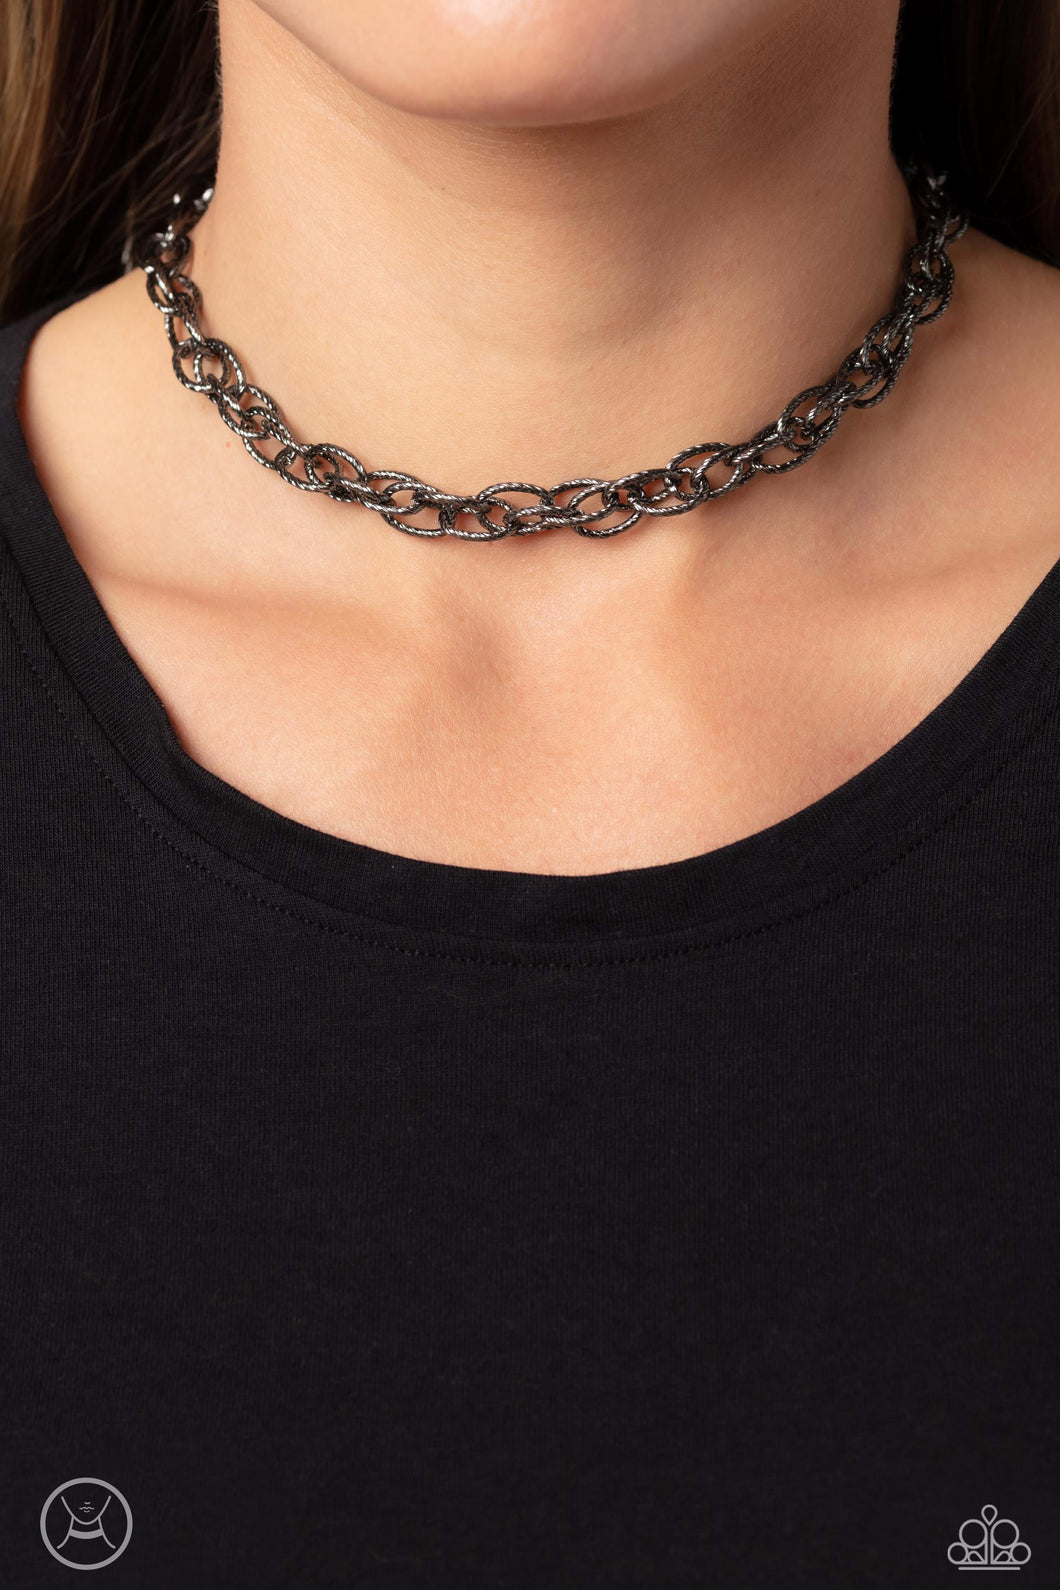 If I Only Had a Chain Black Choker Necklace